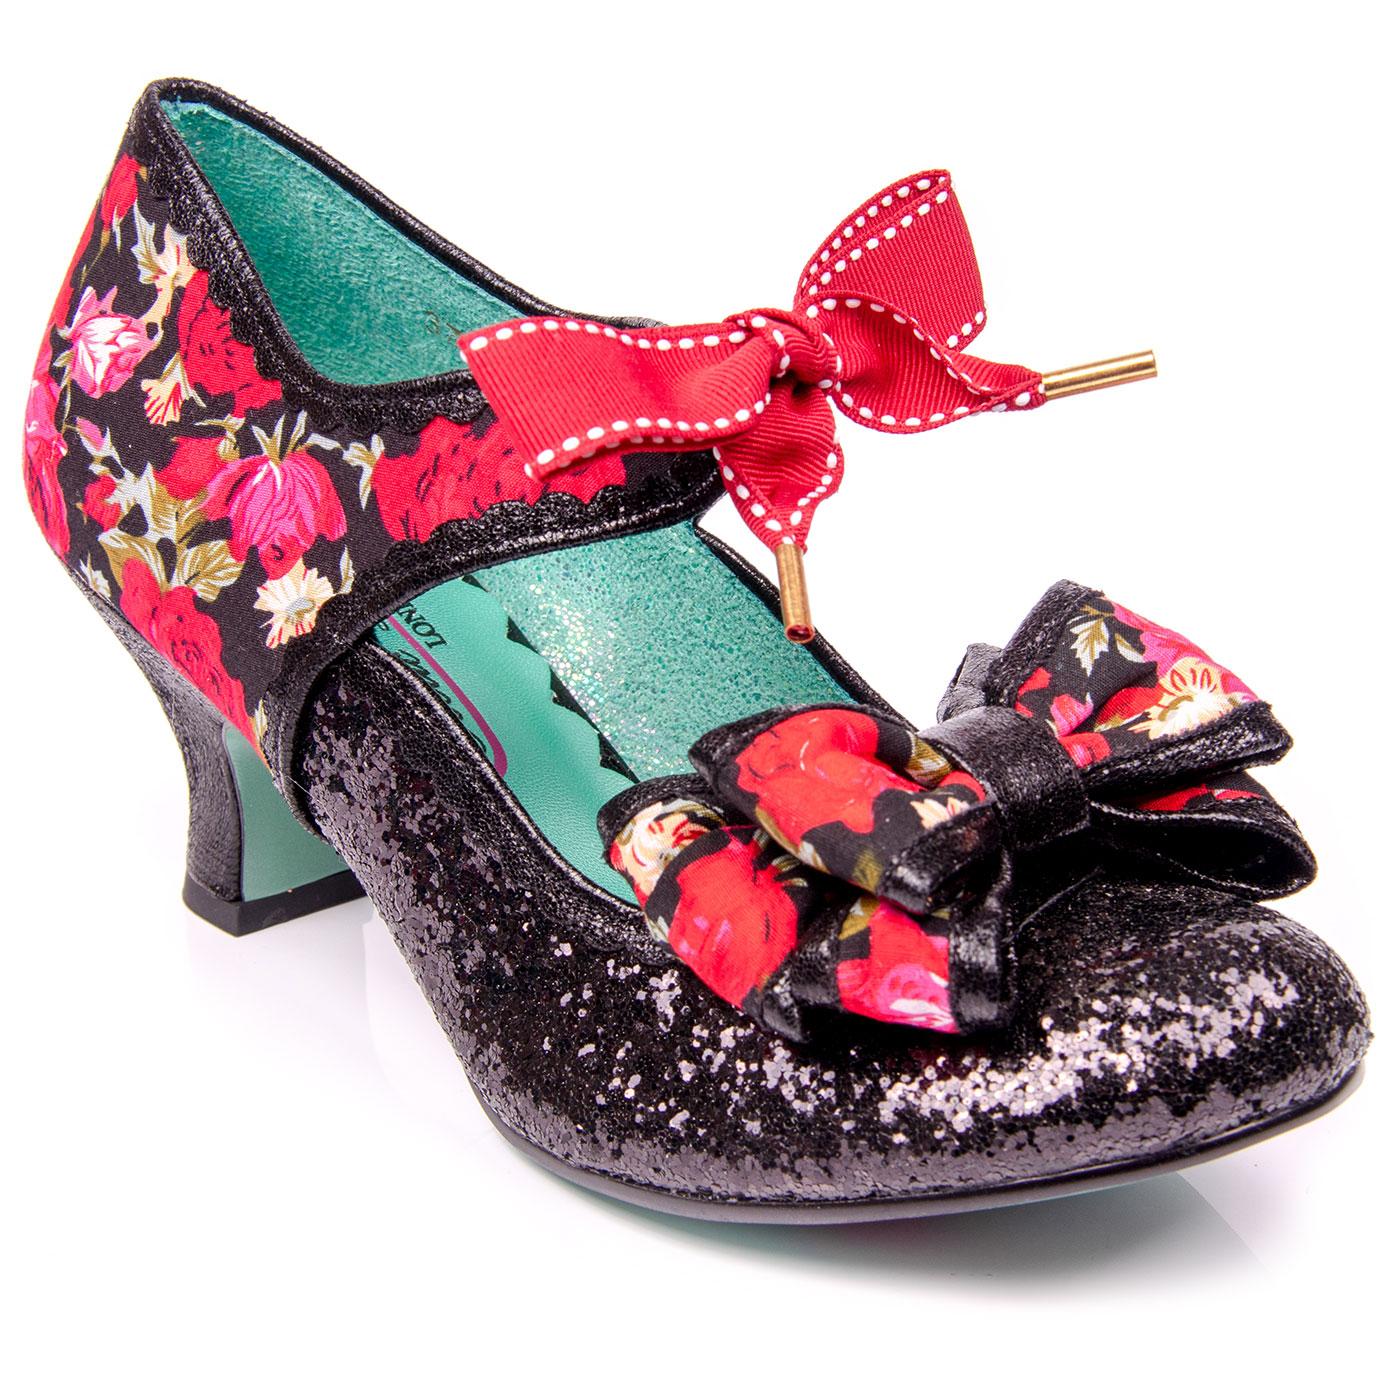 Poetic Licence By Irregular Choice 'Flower Moon' B High Heel Floral Shoes